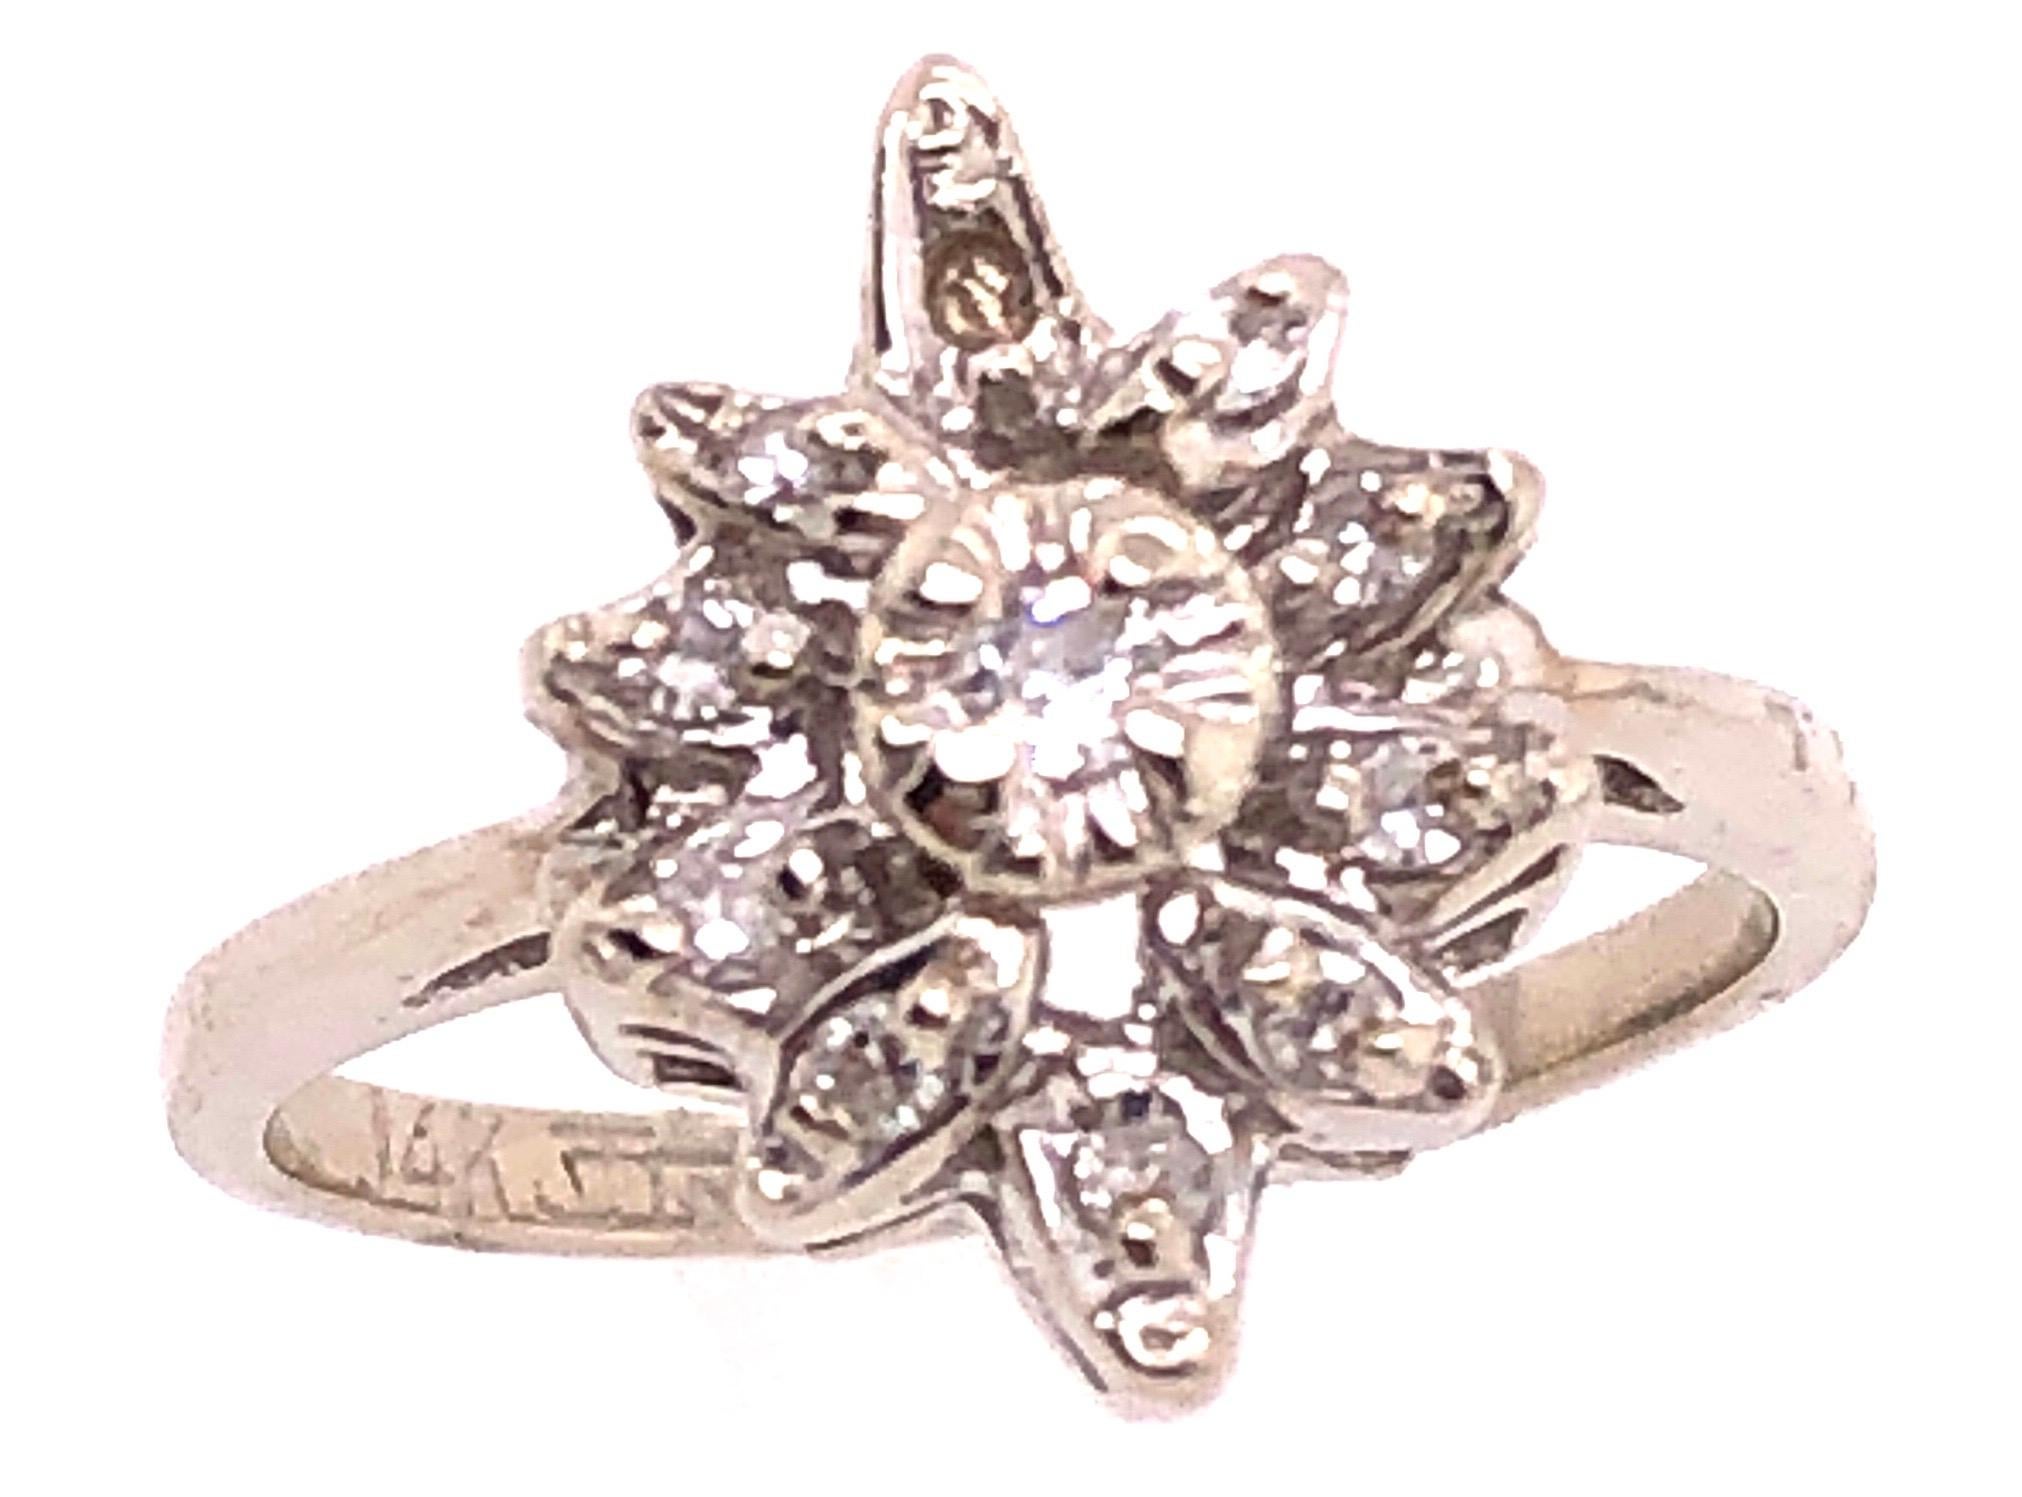 14 Karat White Gold Contemporary Ring with Diamonds 0.33 Total Diamond Weight.
Size 5.75
3.29 grams total weight.